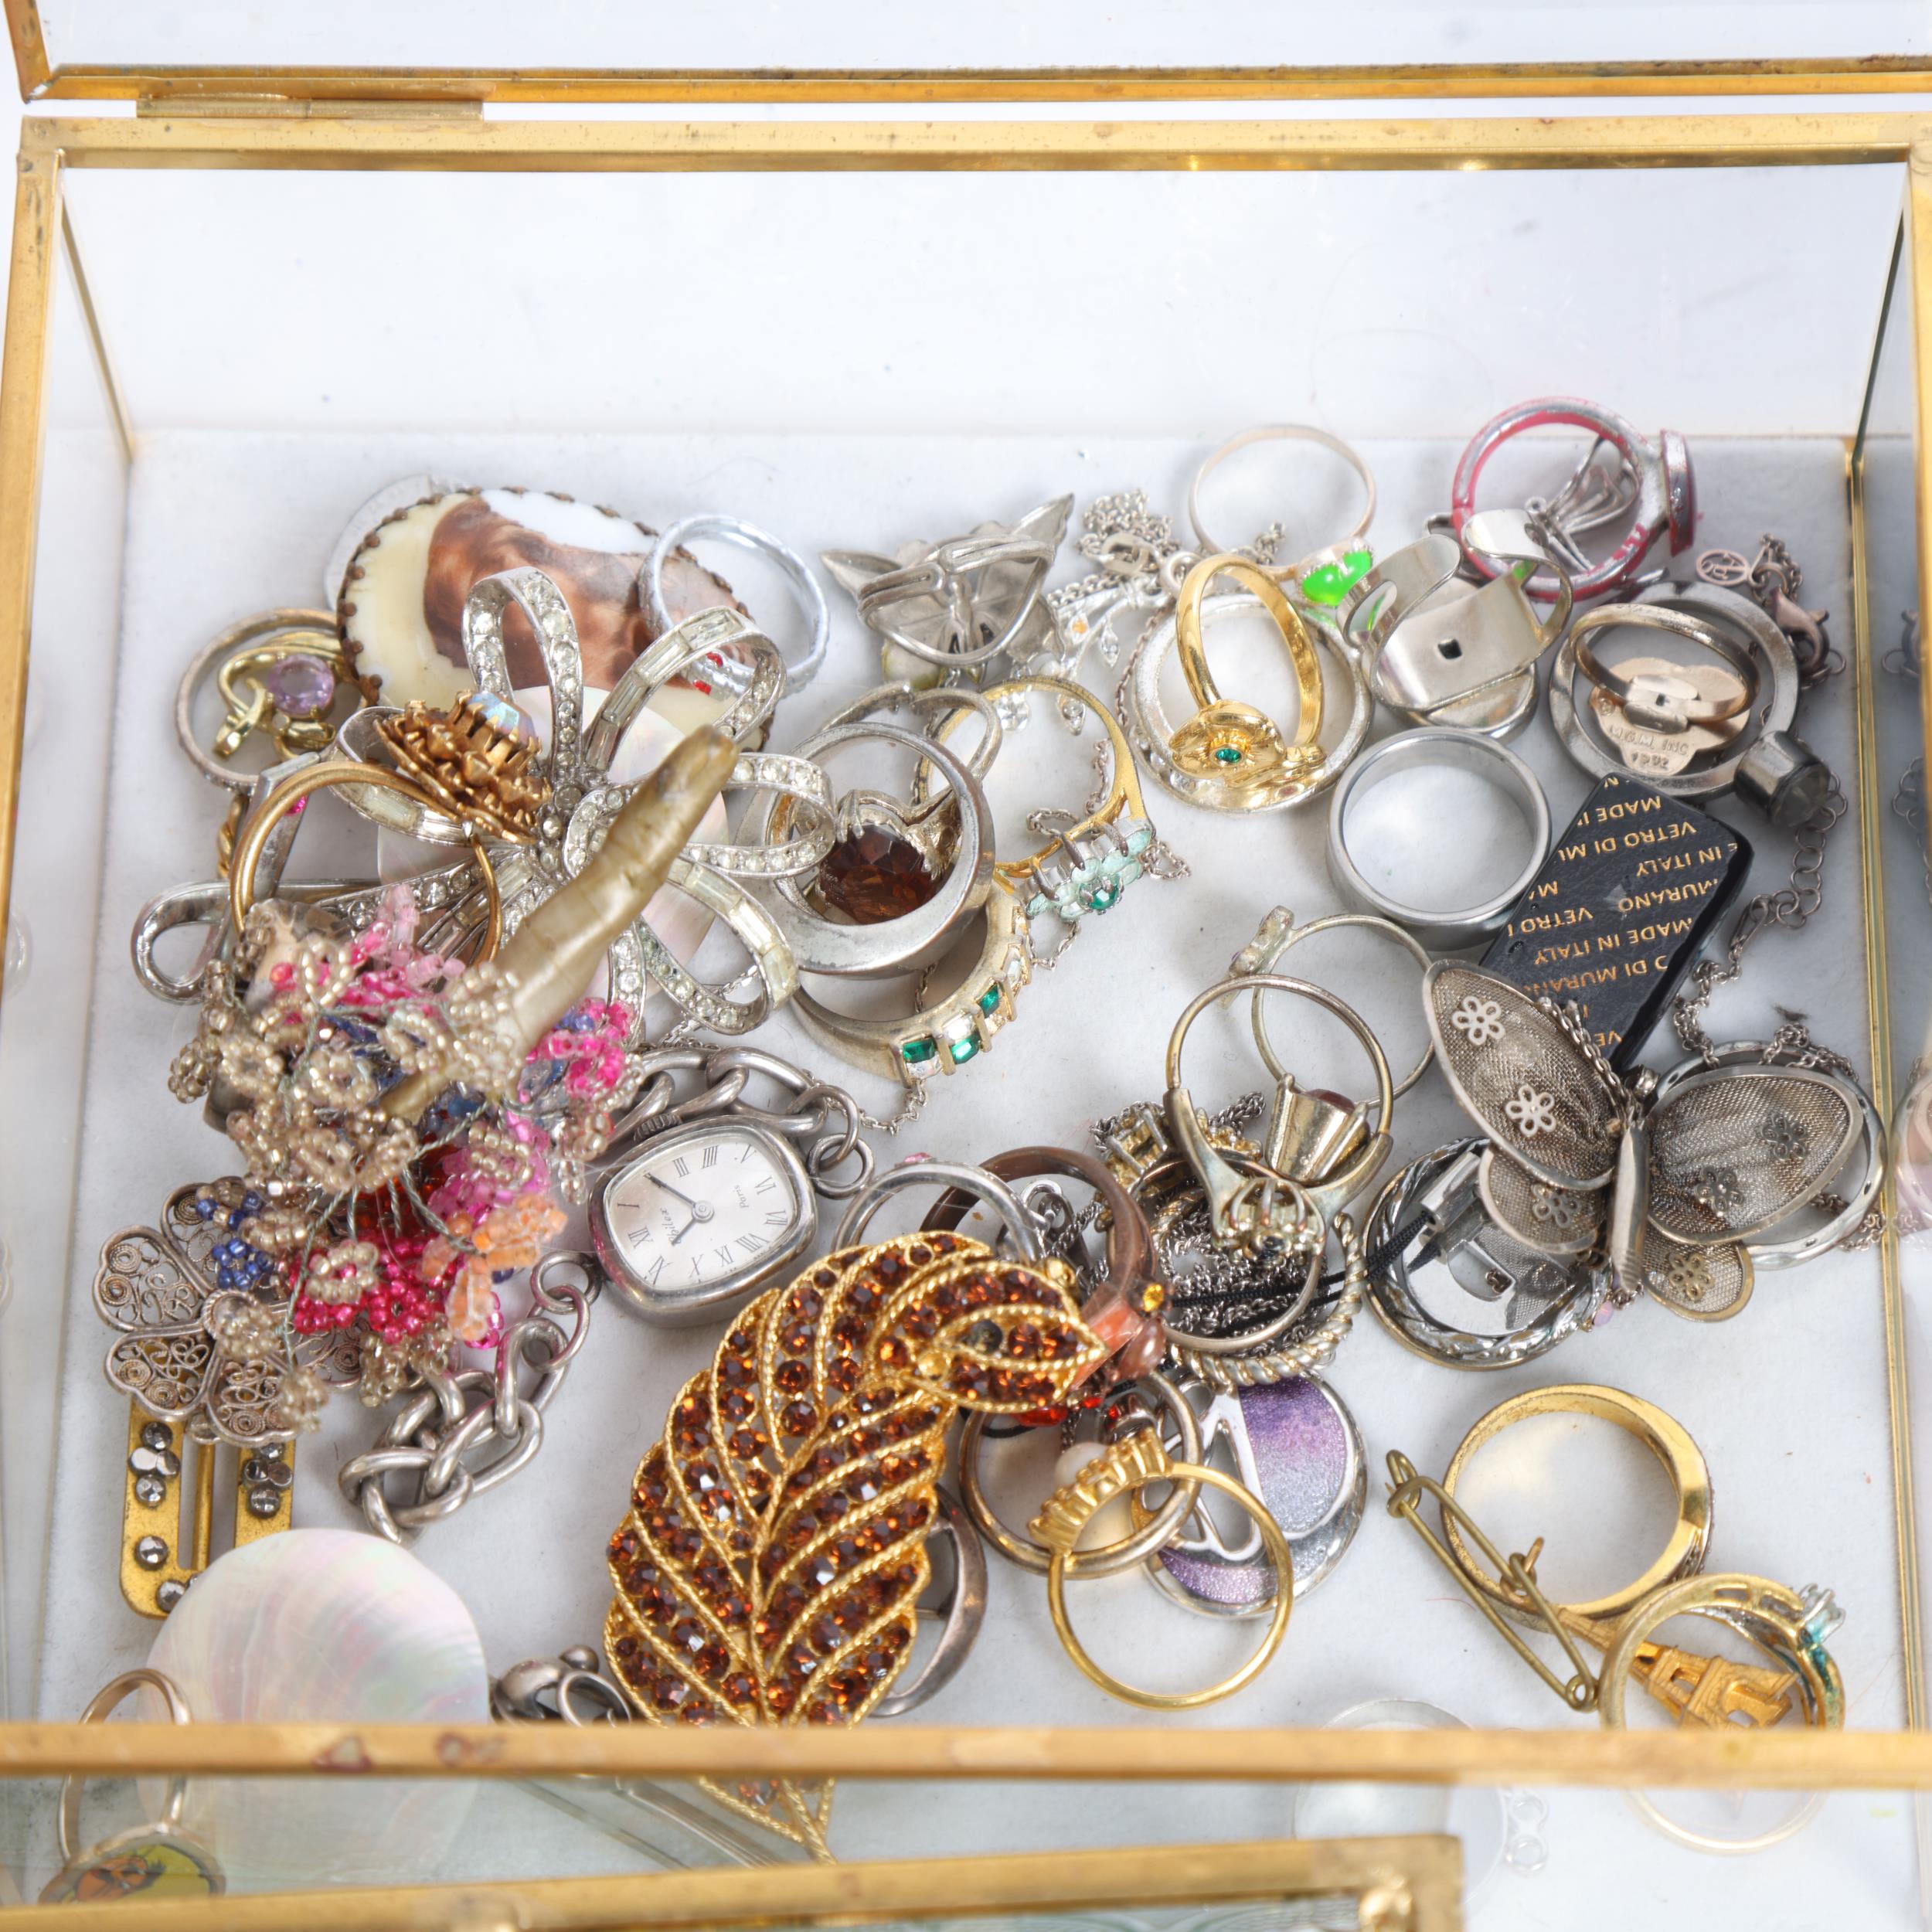 3 display cases of mixed Vintage and other costume brooches, rings, earrings, etc - Image 2 of 2